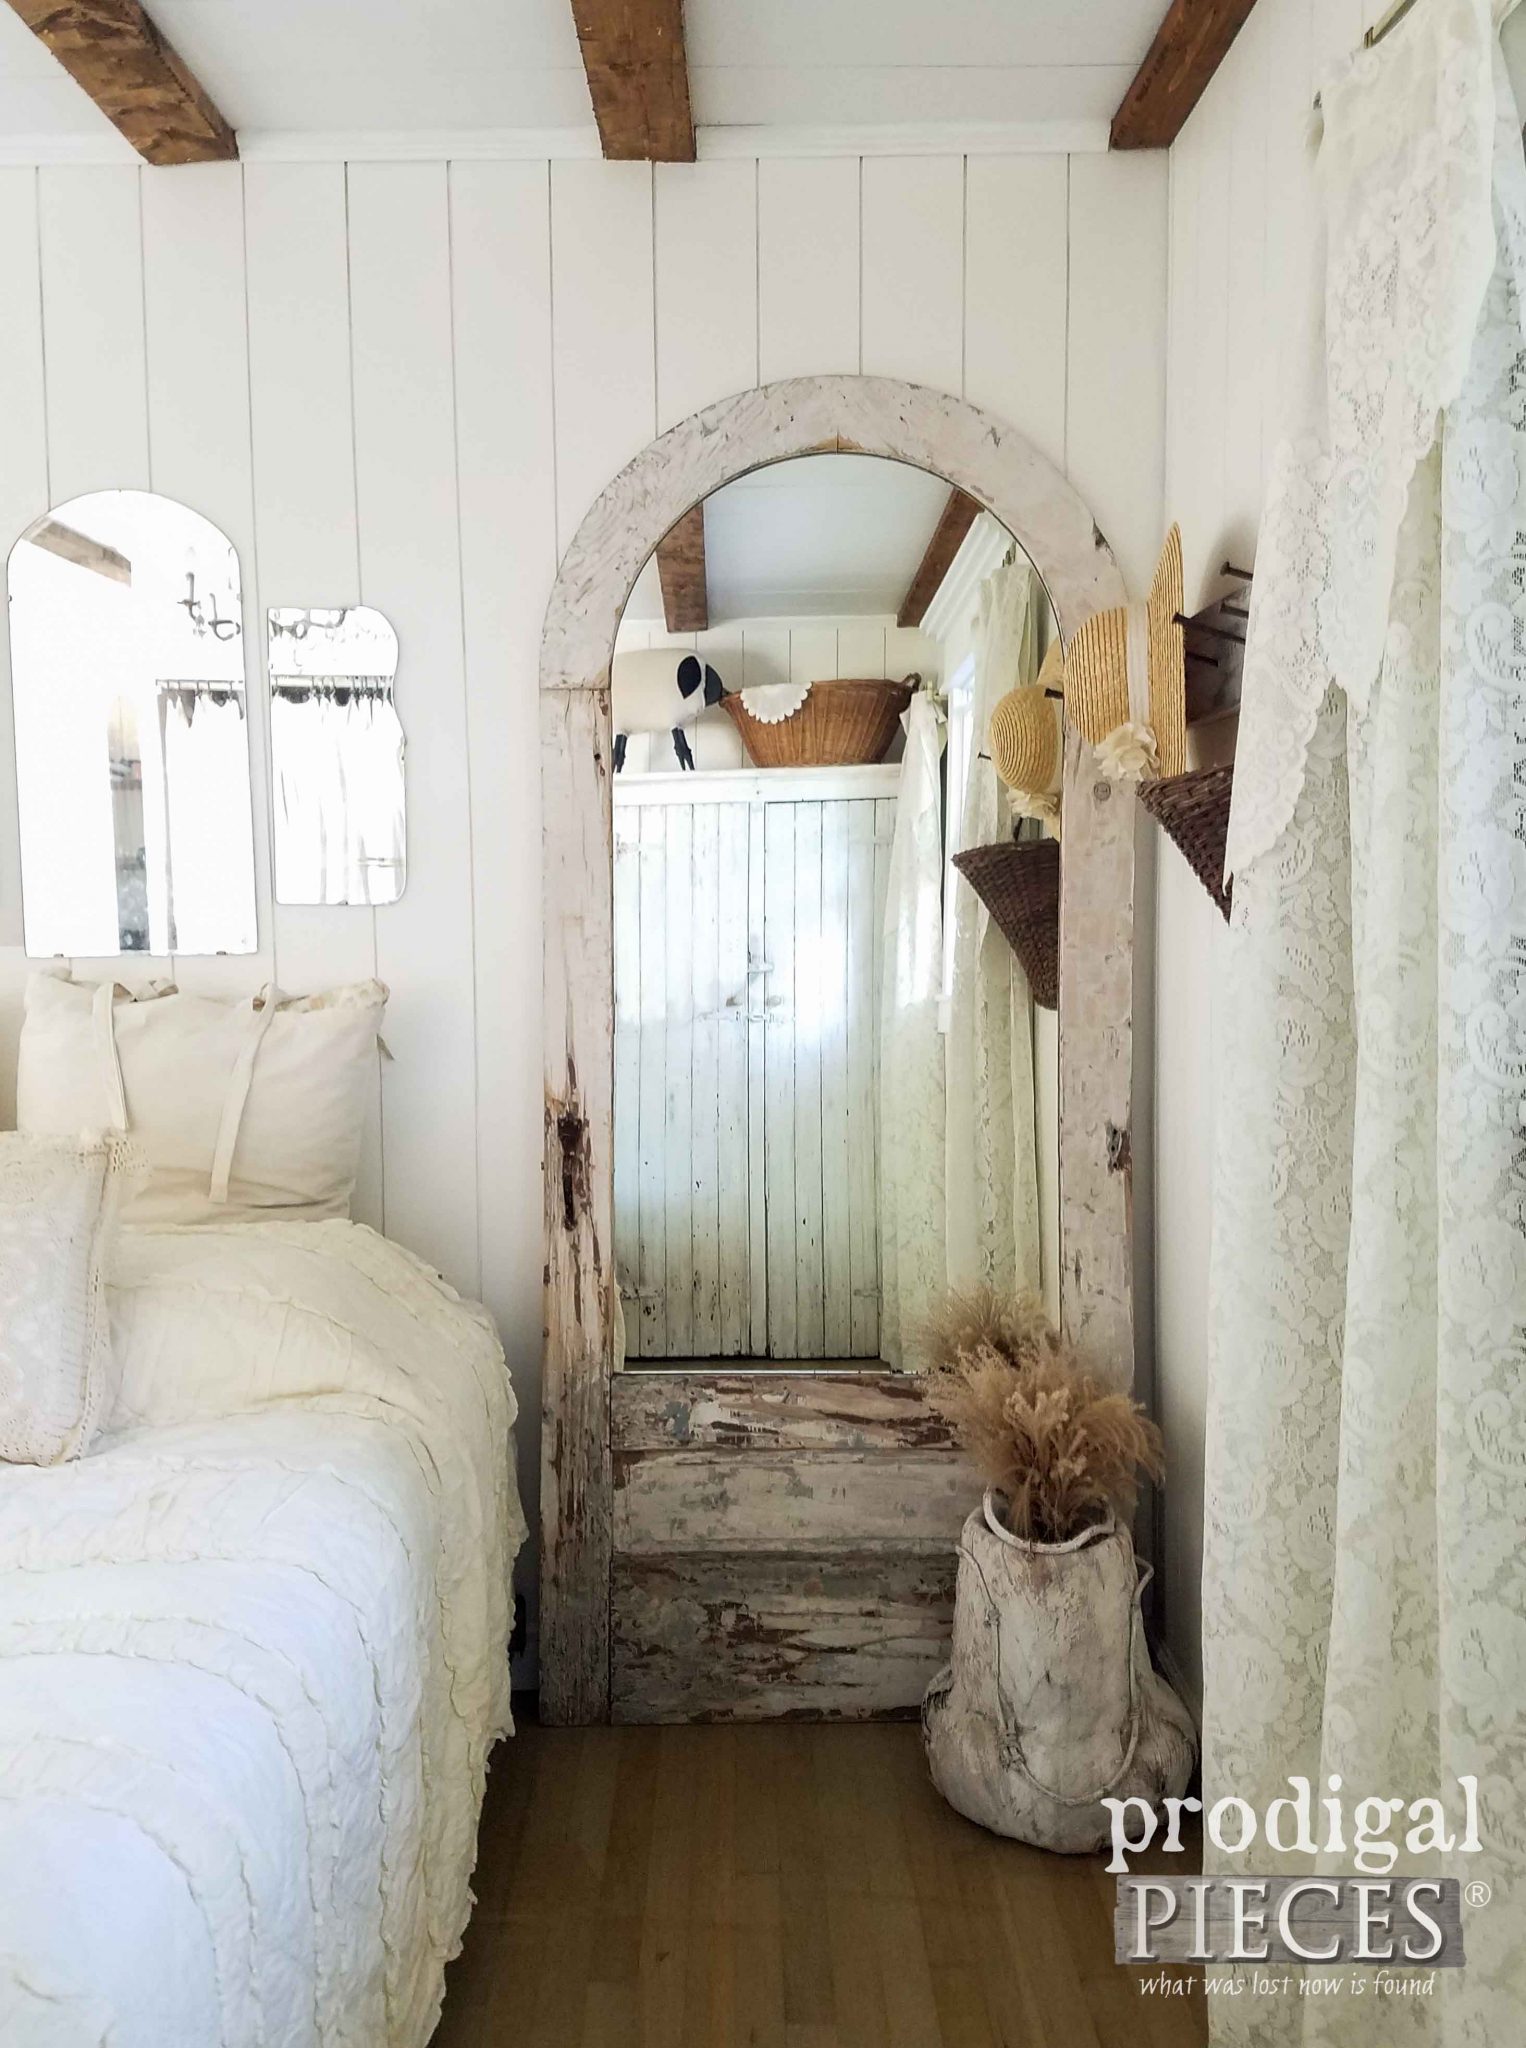 Beautiful Arched Door Turned into Mirror for Farmhouse Decor by Prodigal Pieces | prodigalpieces.com